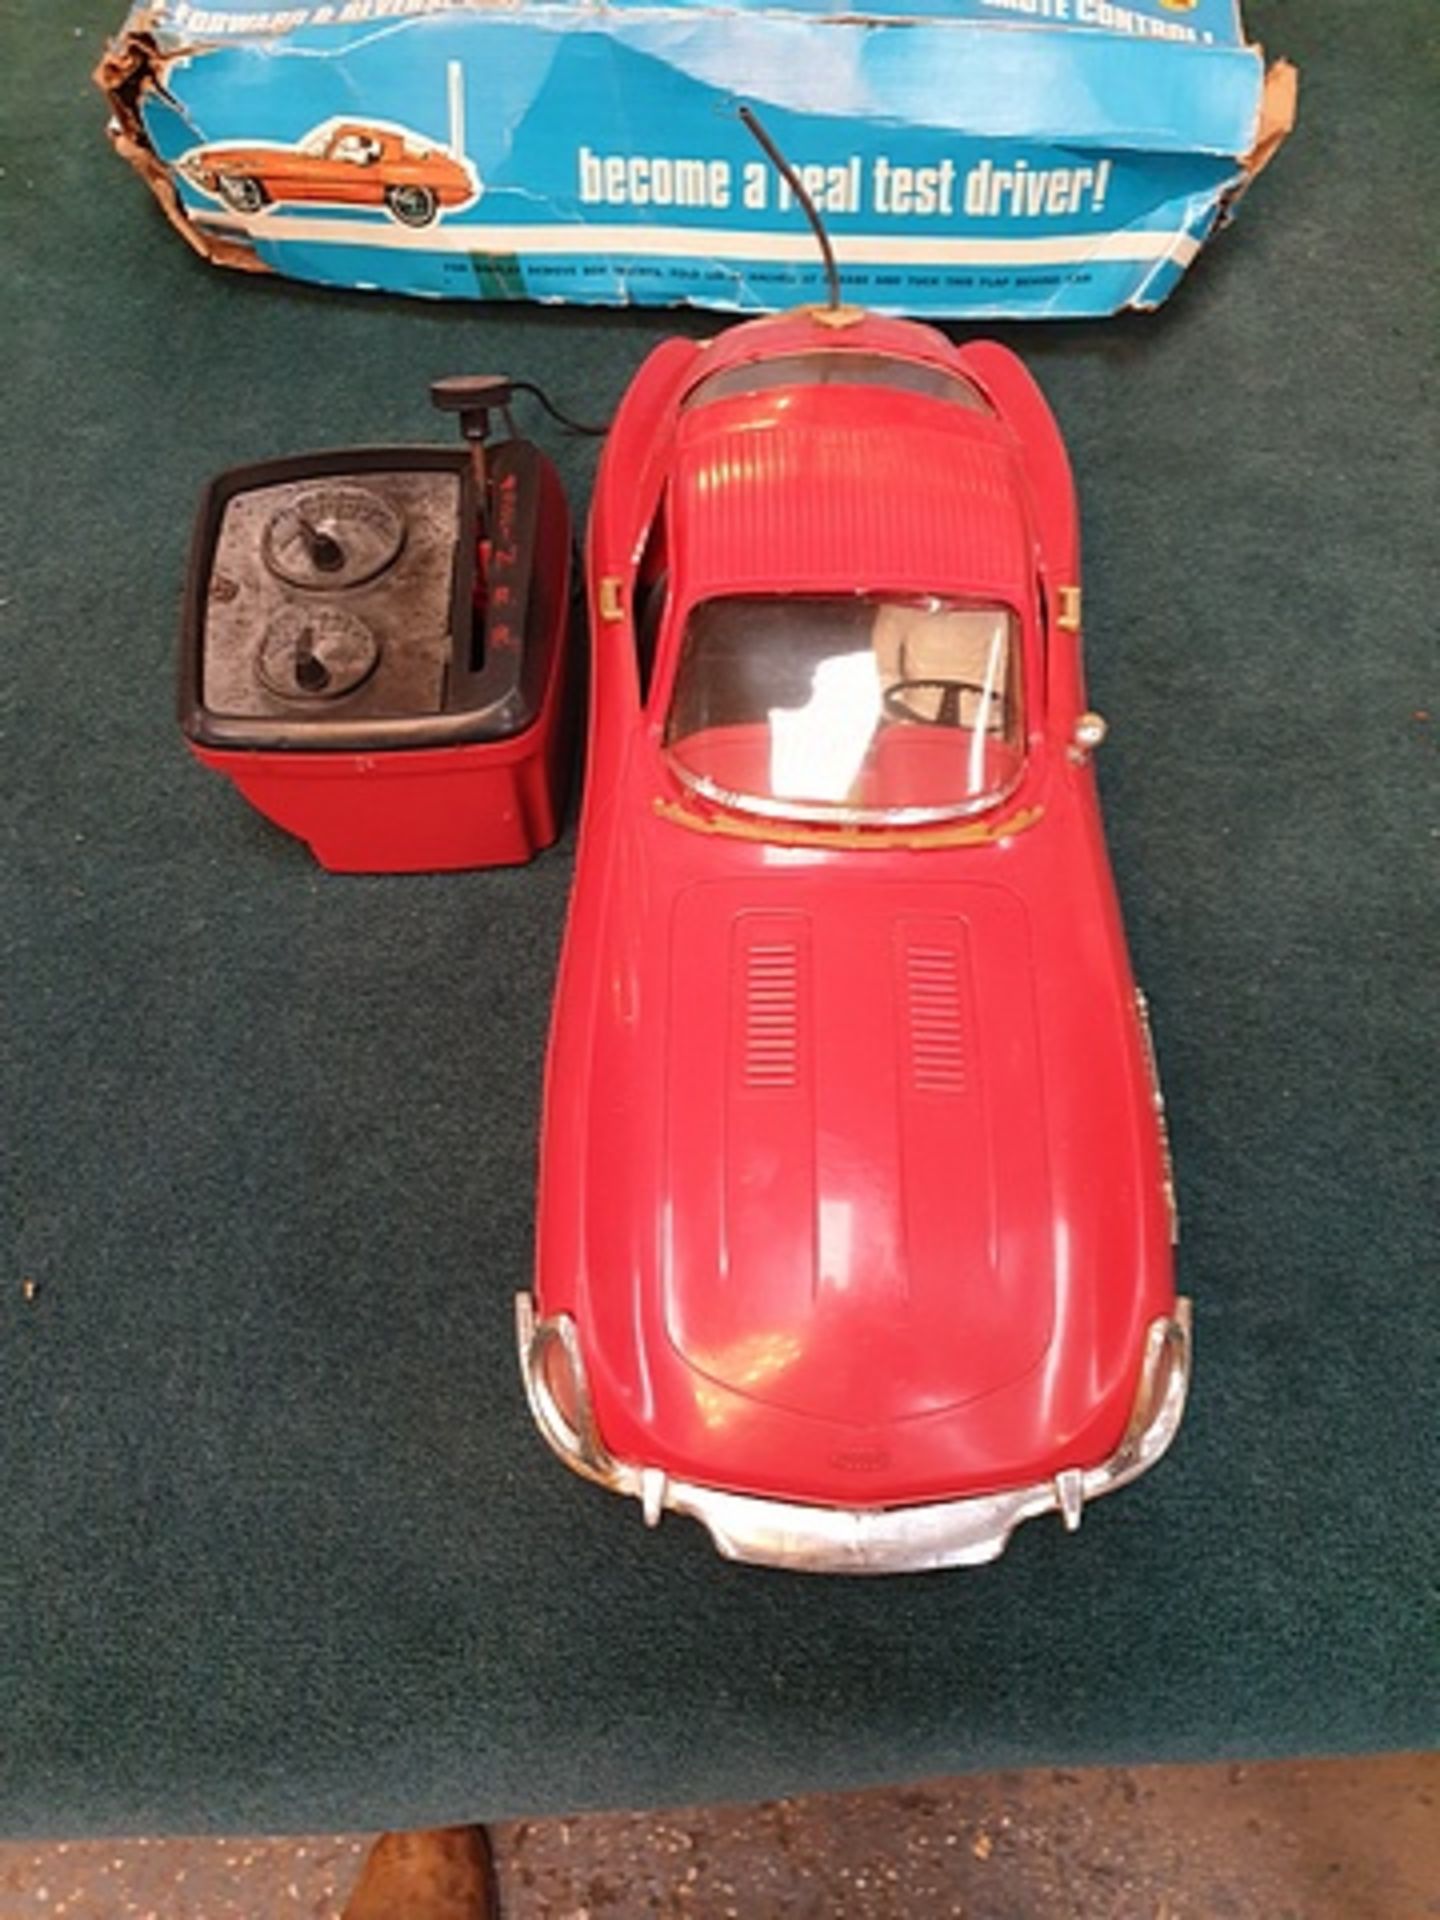 Tri-Ang Topper Toys 1966 Johnny Speed Remote Control Giant Size Racing Car Jaguar. Measures 21" - Image 2 of 3